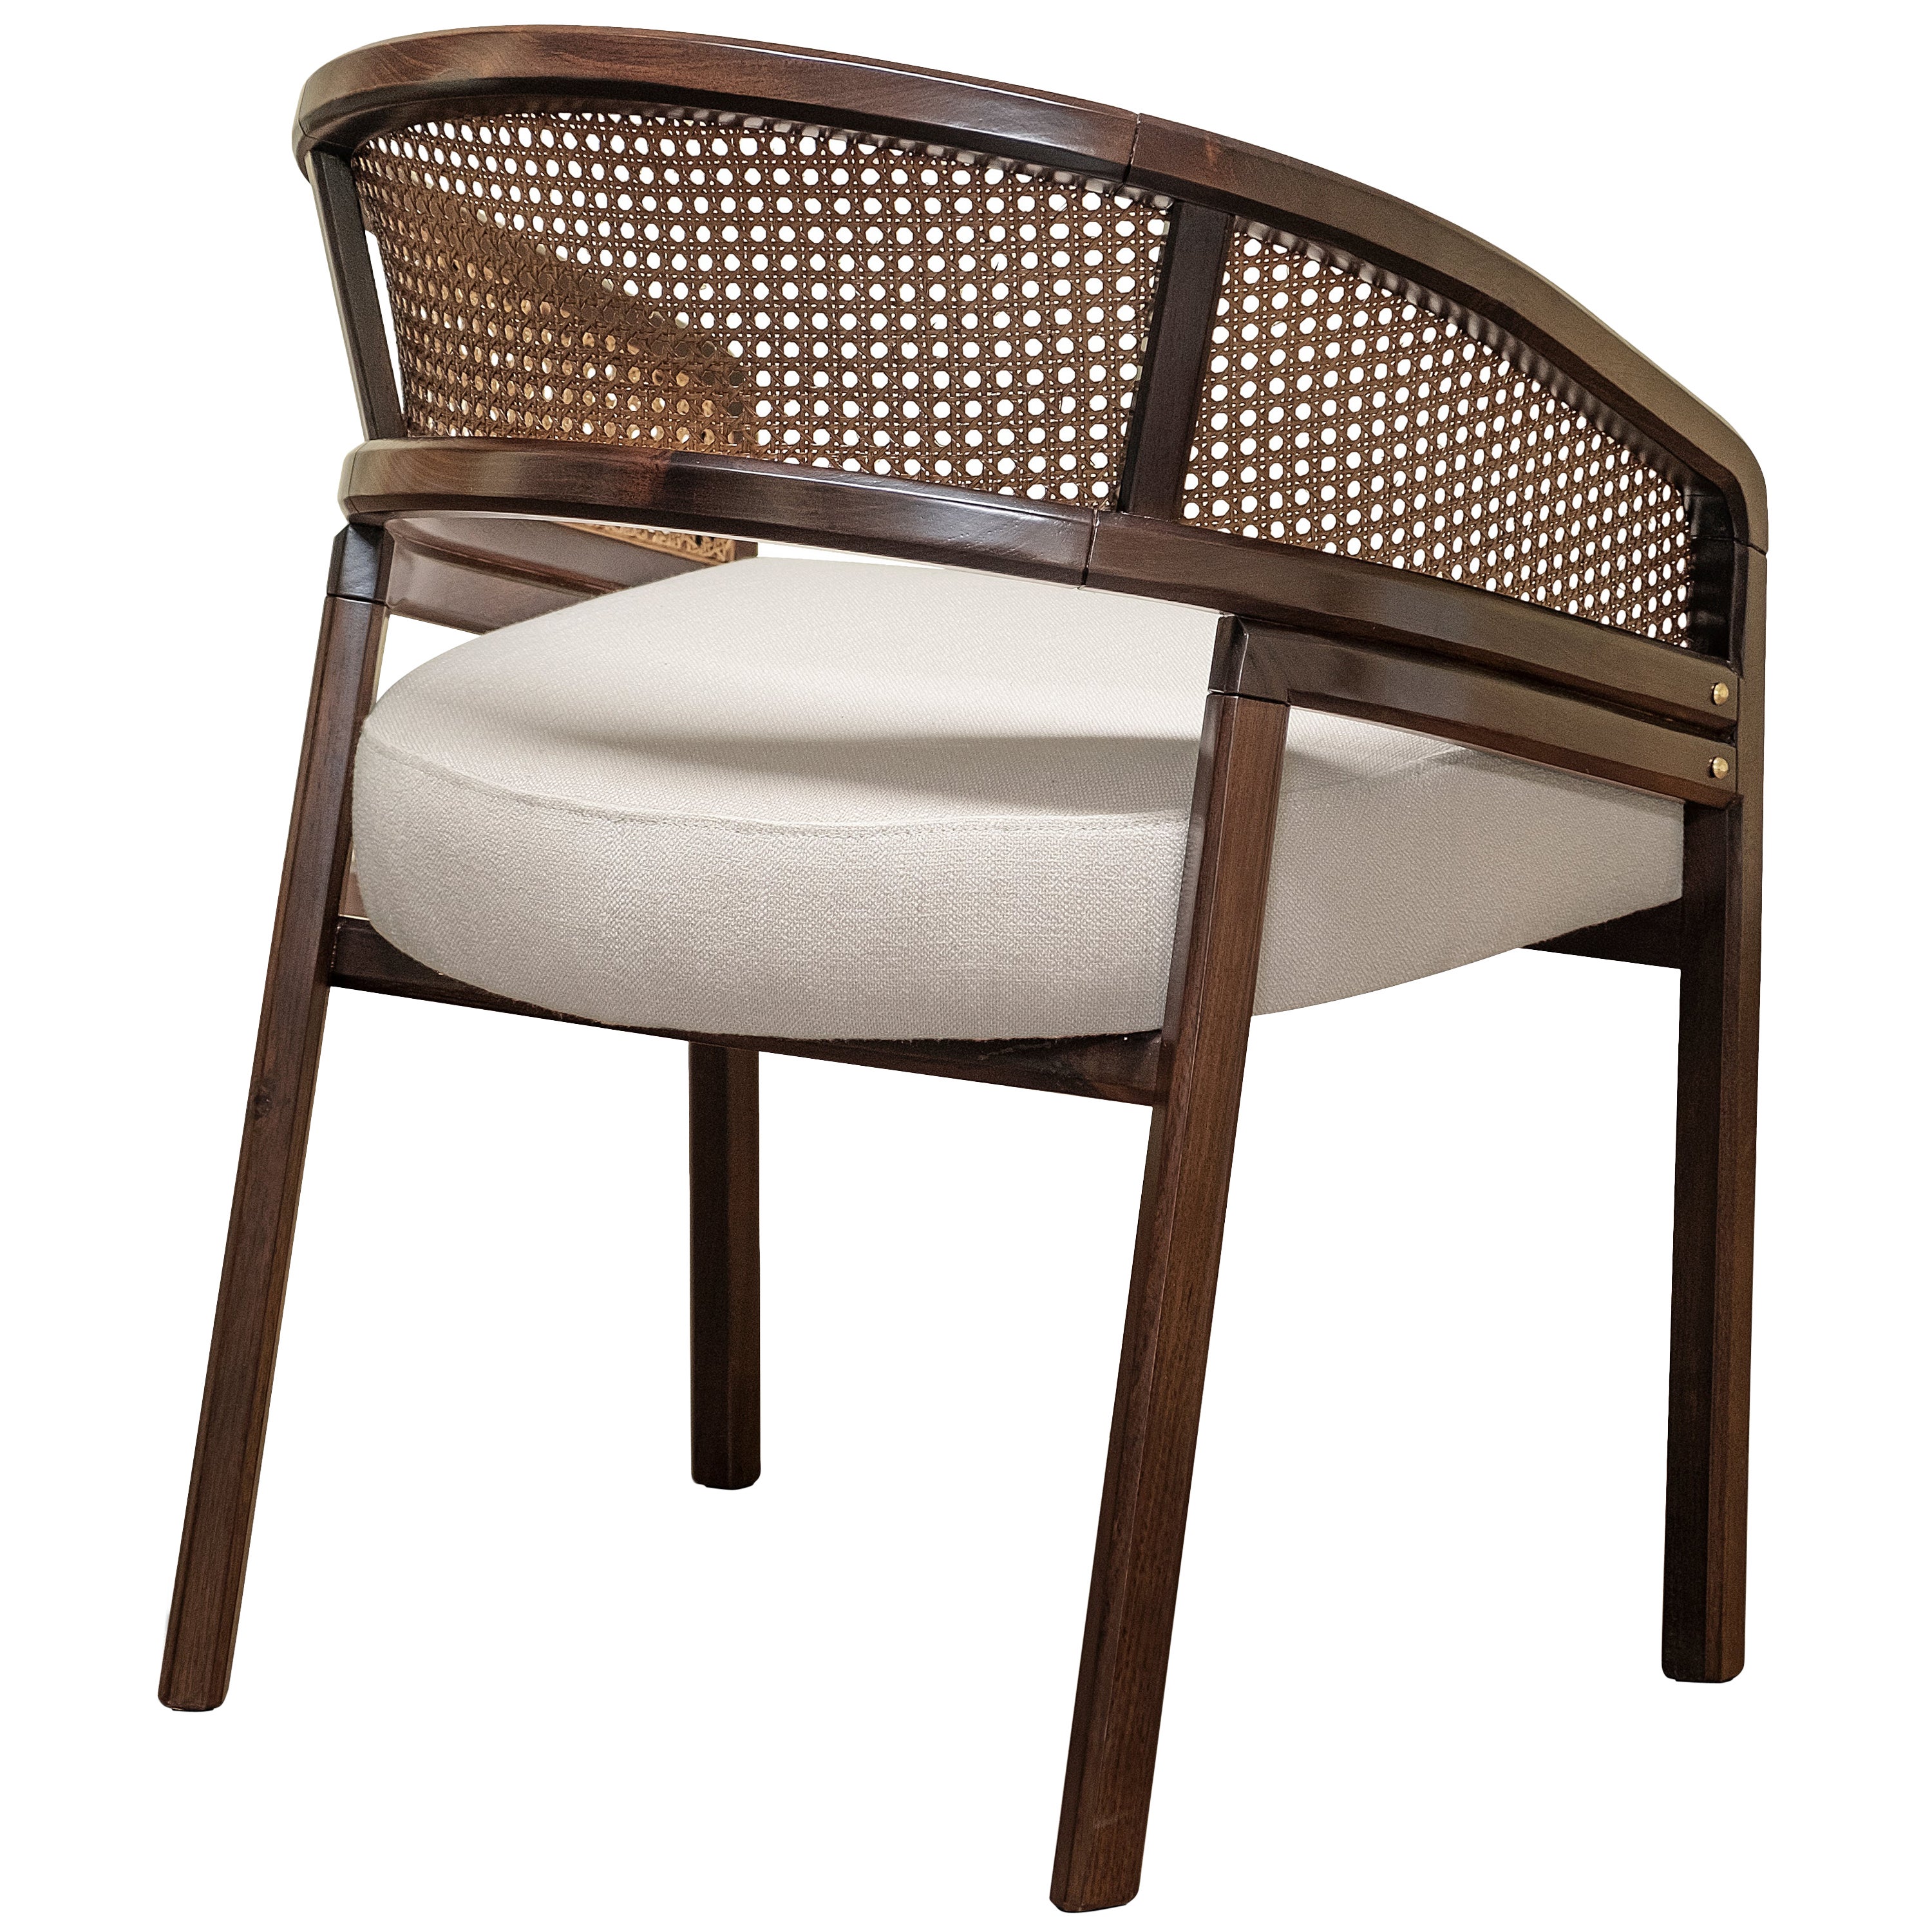 20th Century Linen Rattan George Dining Chair Walnut Wood For Sale at